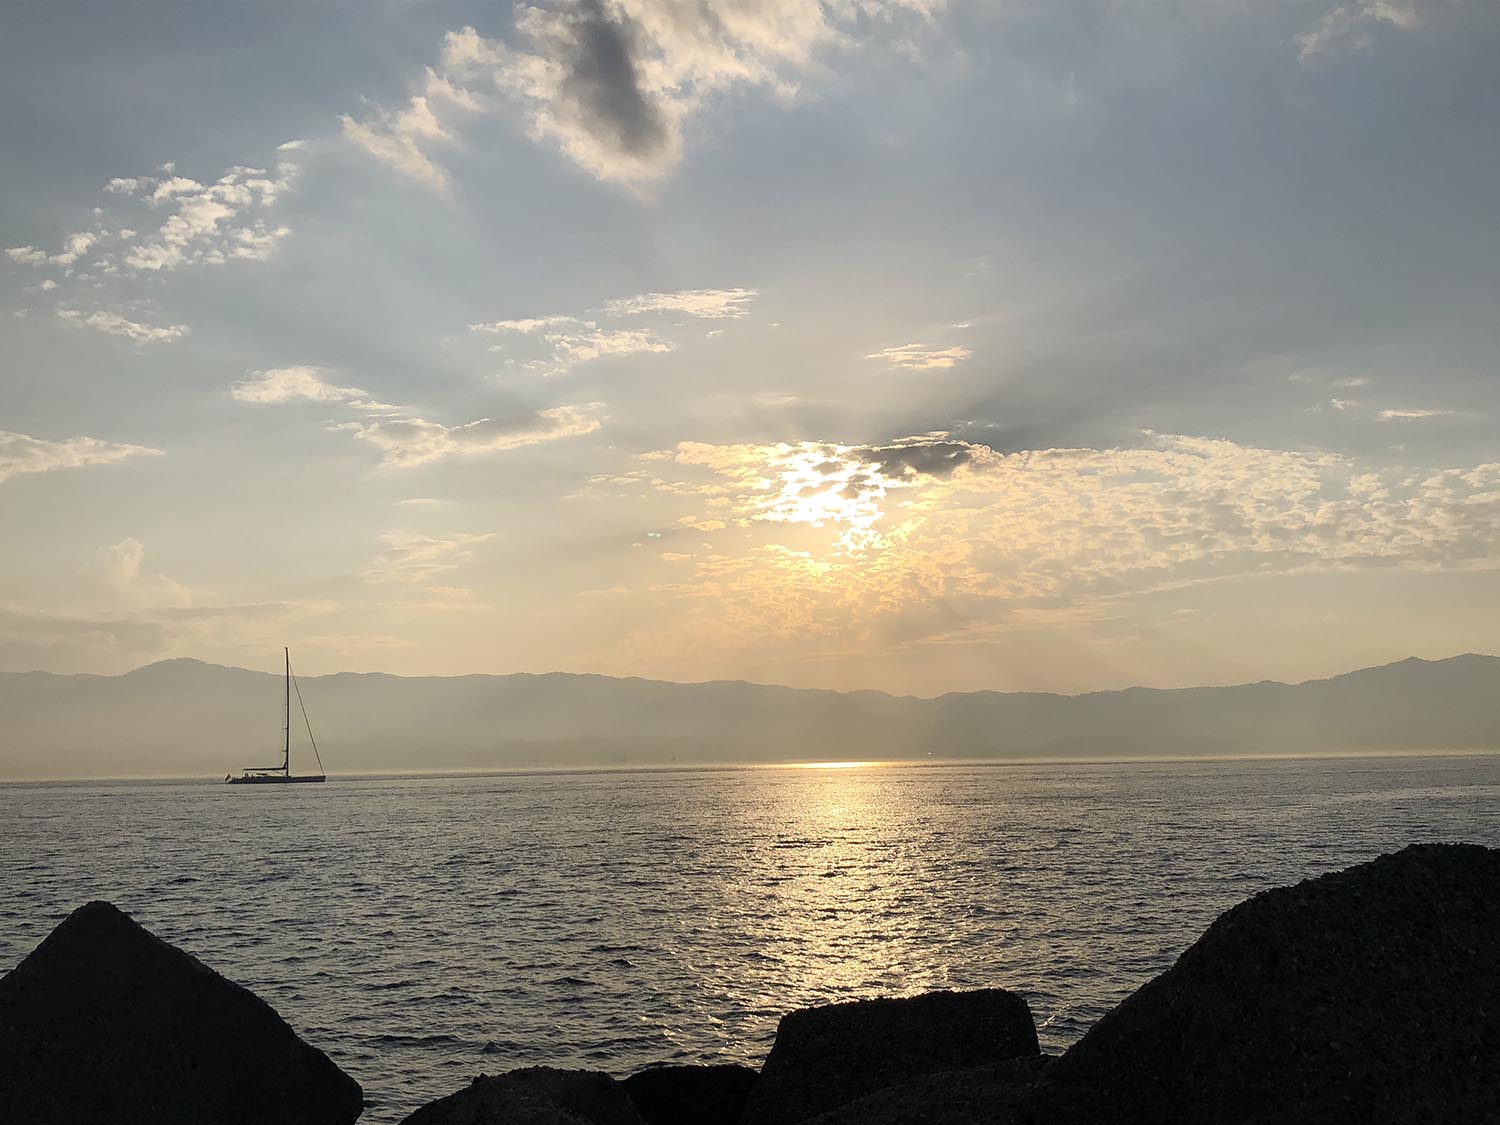 Grant Hill '22 won Best Photo of Landscape for his image titled “il tramonto bacia lo Stretto di Messina (Sunset Kisses the Straight of Messina)," taken in Catona, Reggio di Calabria, Italy. "This photo was taken from the beach of Catona, a small town of Reggio di Calabria in Italy, overlooking the Straight of Messina and Sicily," Hill explained. "The sun sets over Sicily as a sailboat calmly traverses the Straight of Messina in the evening hours of an August day. A sunset which graces the southern coast of Italy each evening."